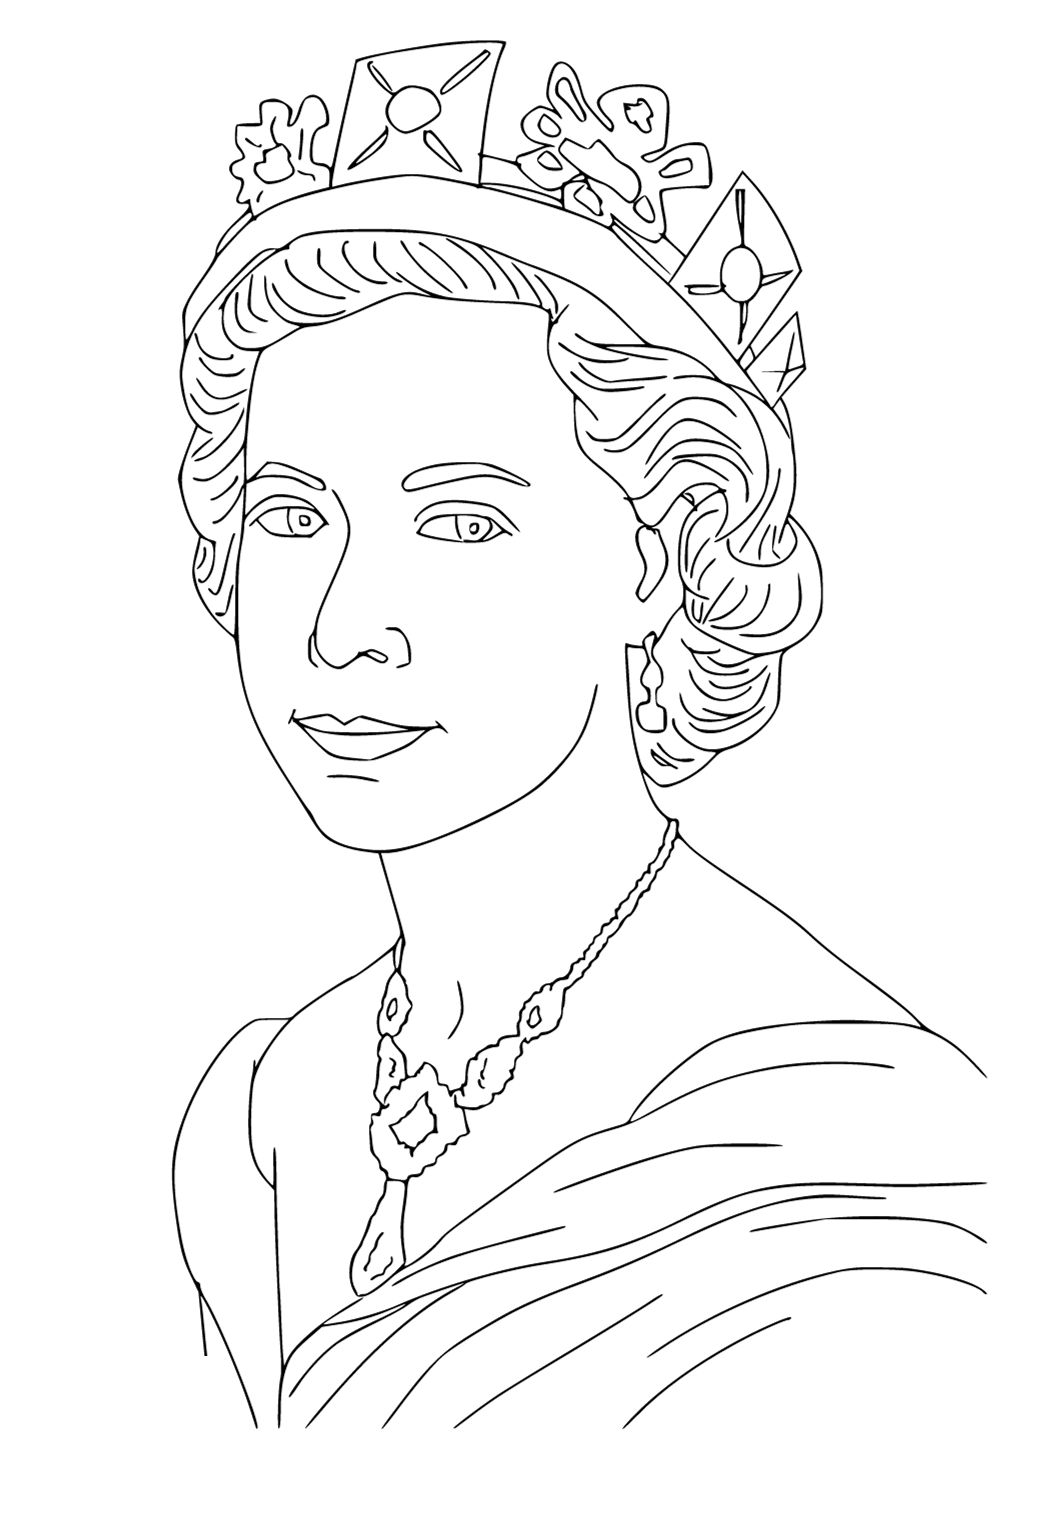 Free Printable Queen Real Coloring Page for Adults and Kids - Lystok.com